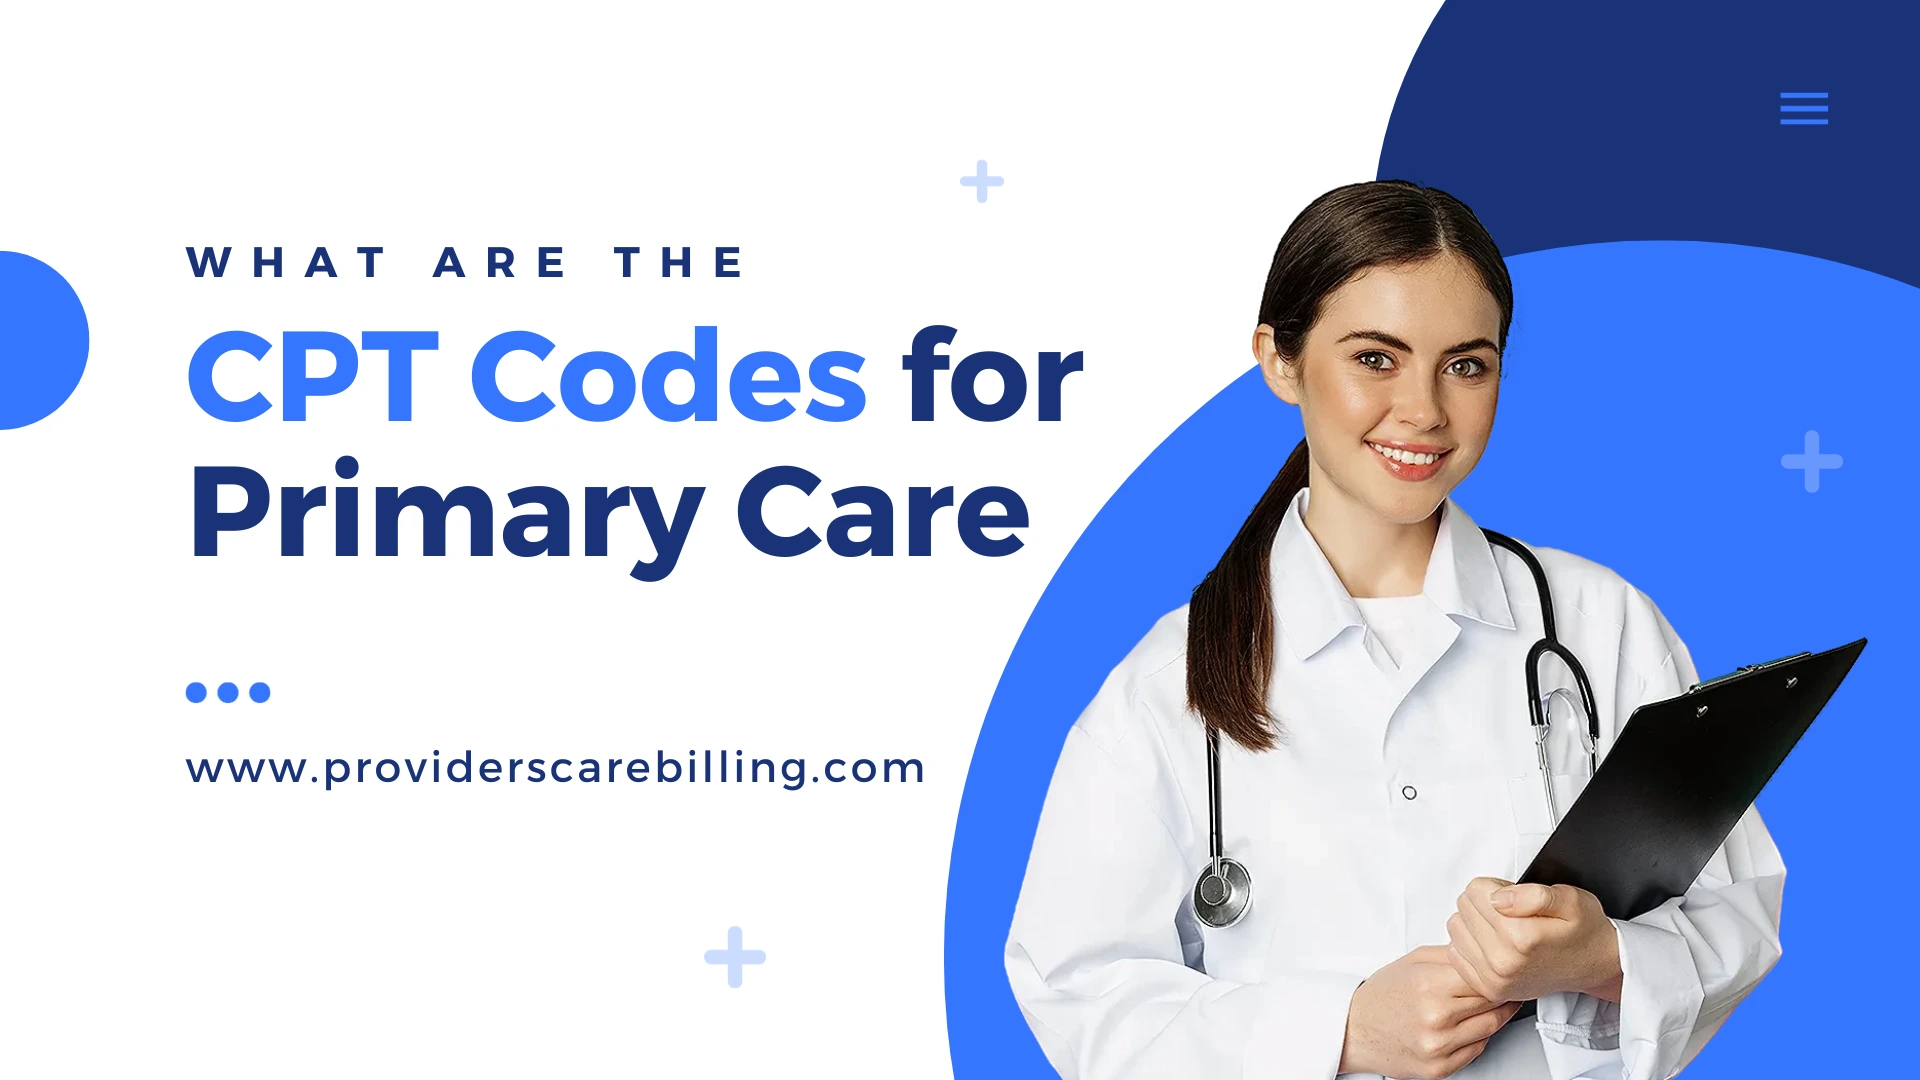 What are the CPT Codes for Primary Care?